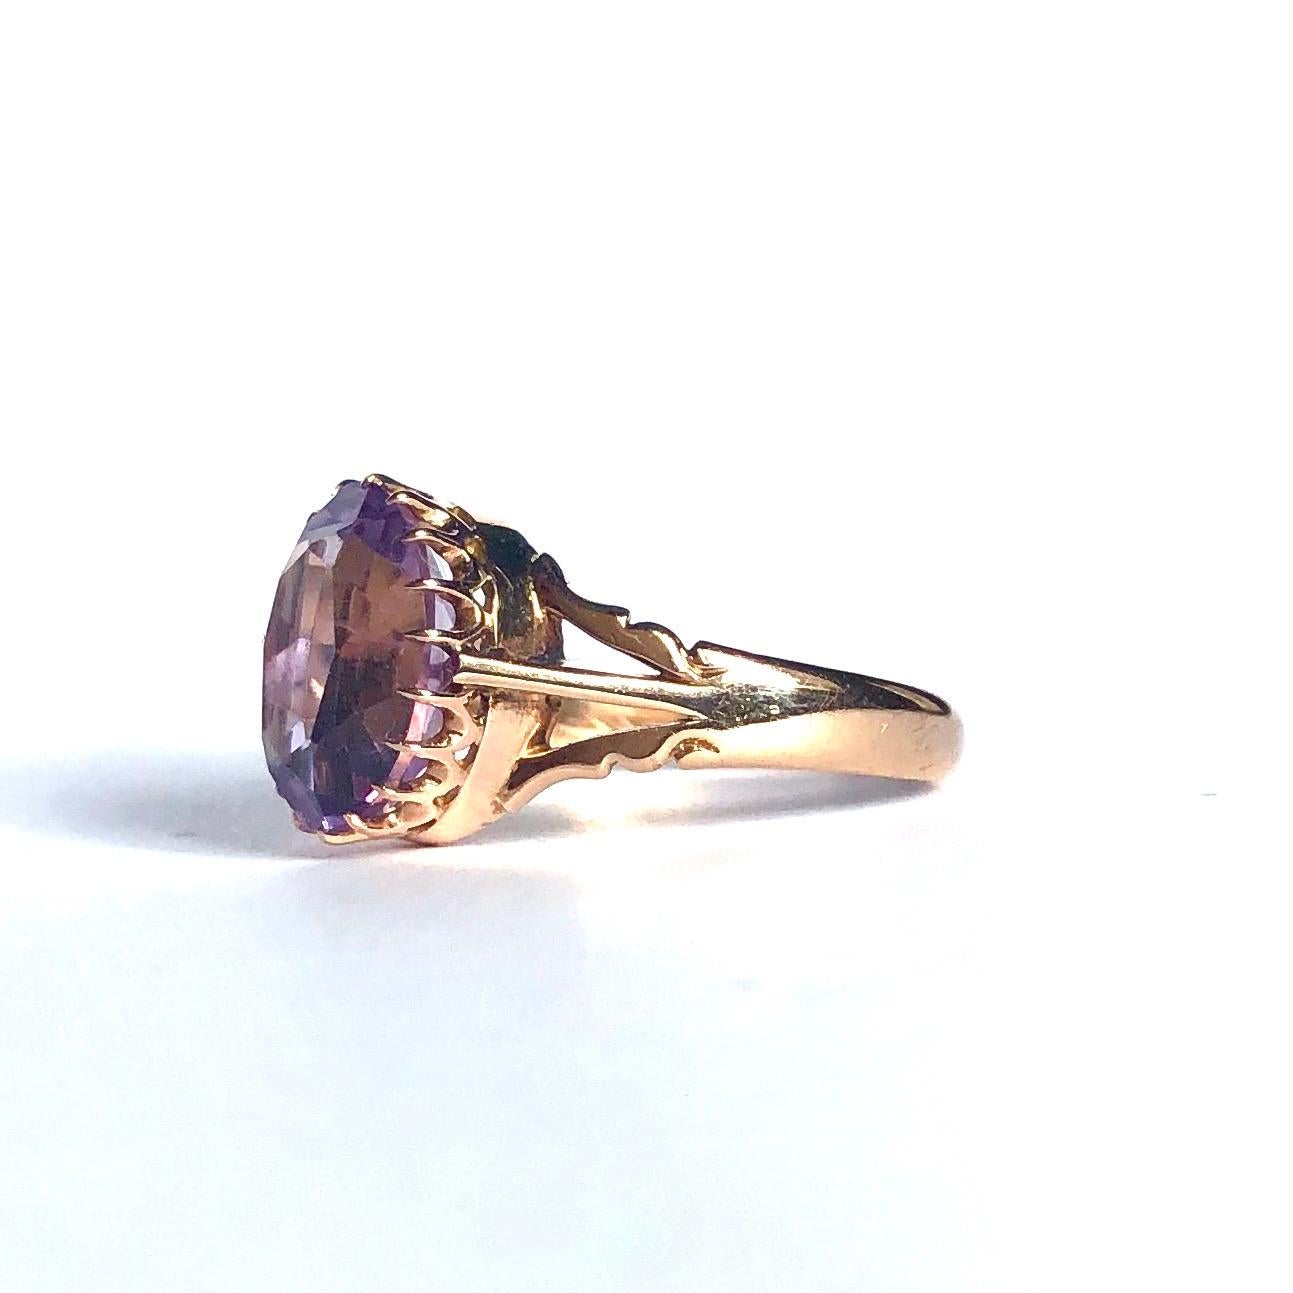 Perched on top of the delicate claw setting is a shimmering pale purple amethyst. The split shoulders on this ring are also gorgeously decorative, a truly beautiful piece. Made in Chester, England.

Ring Size: Q 1/4 or 8 1/4
Stone Dimensions: